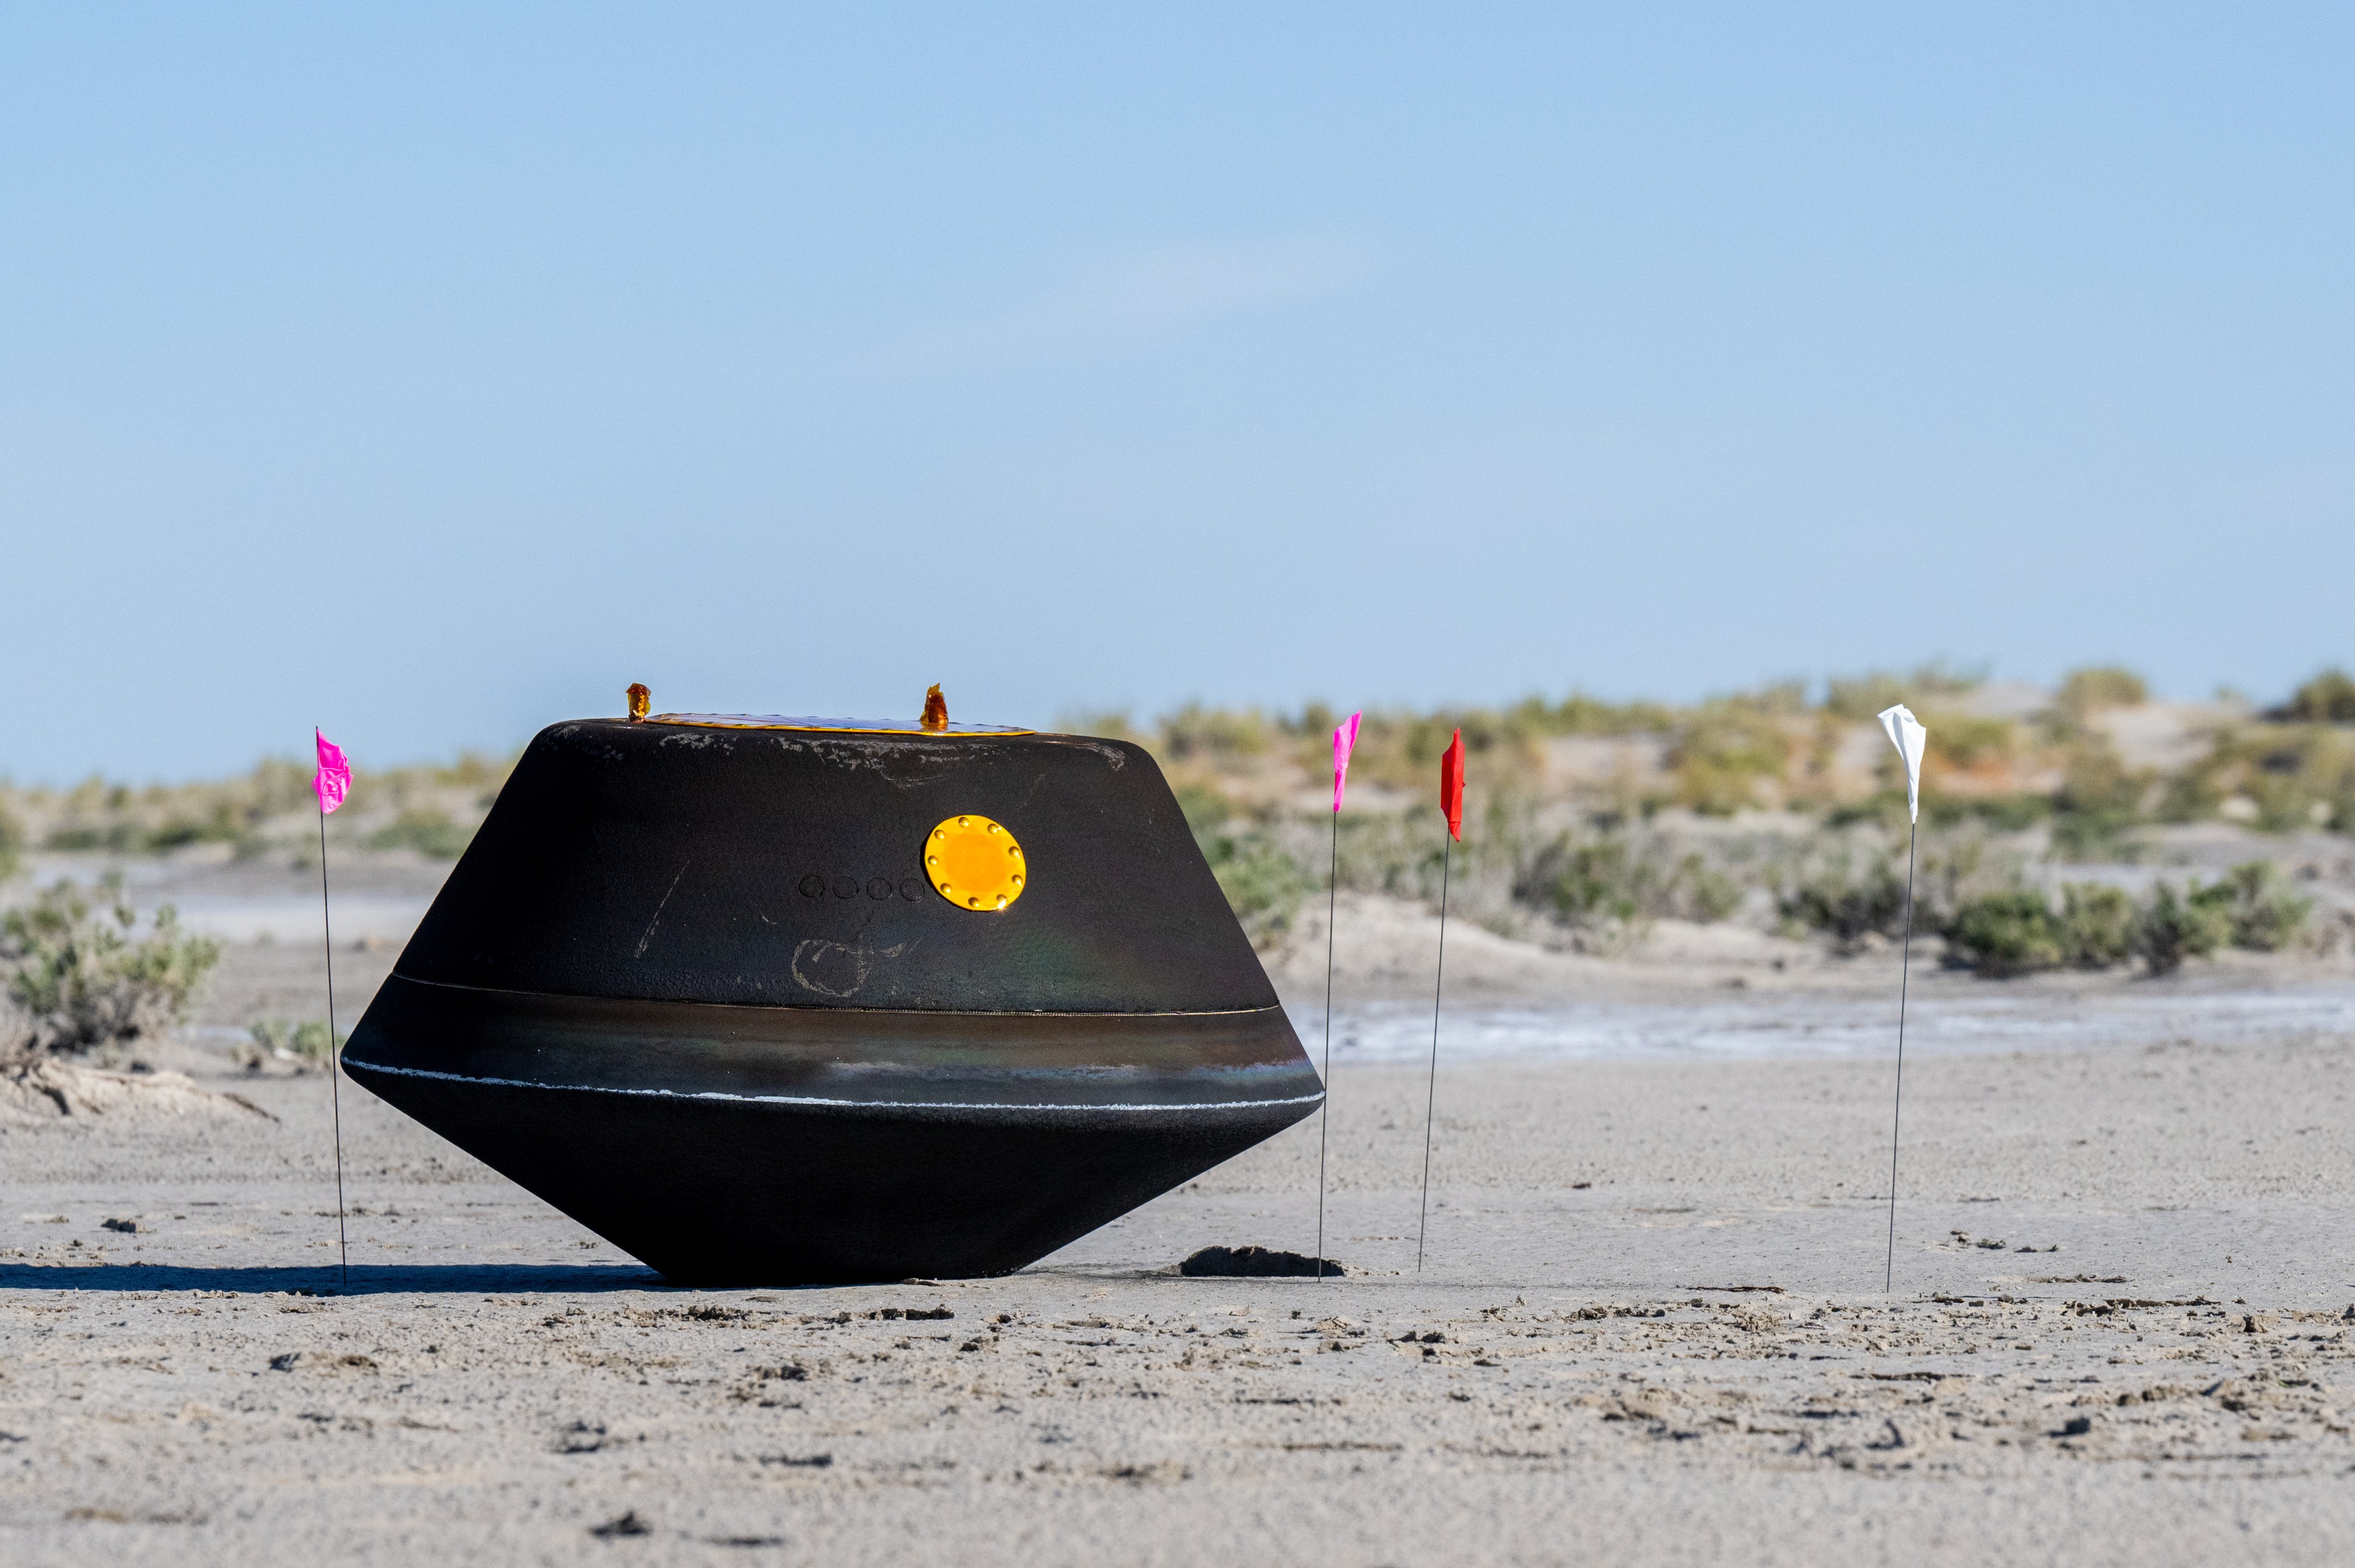 Black, top-shaped sample return capsule sits on the desert ground with flags surrounding it.